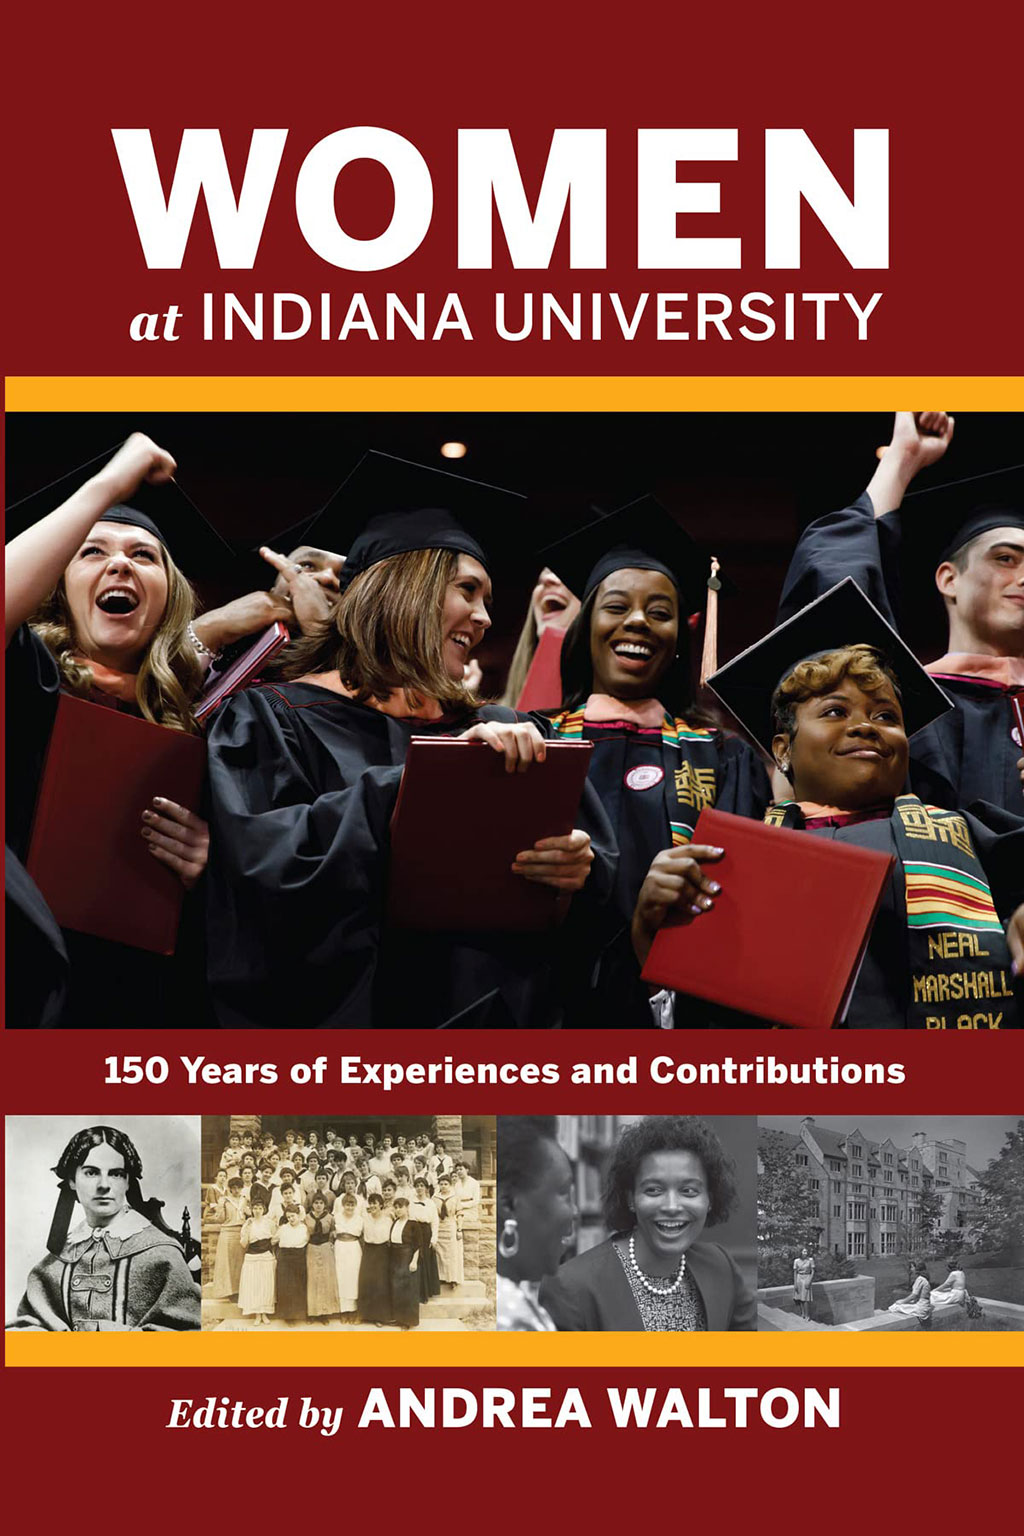 Women at Indiana University: 150 Years of Experiences and Contributions